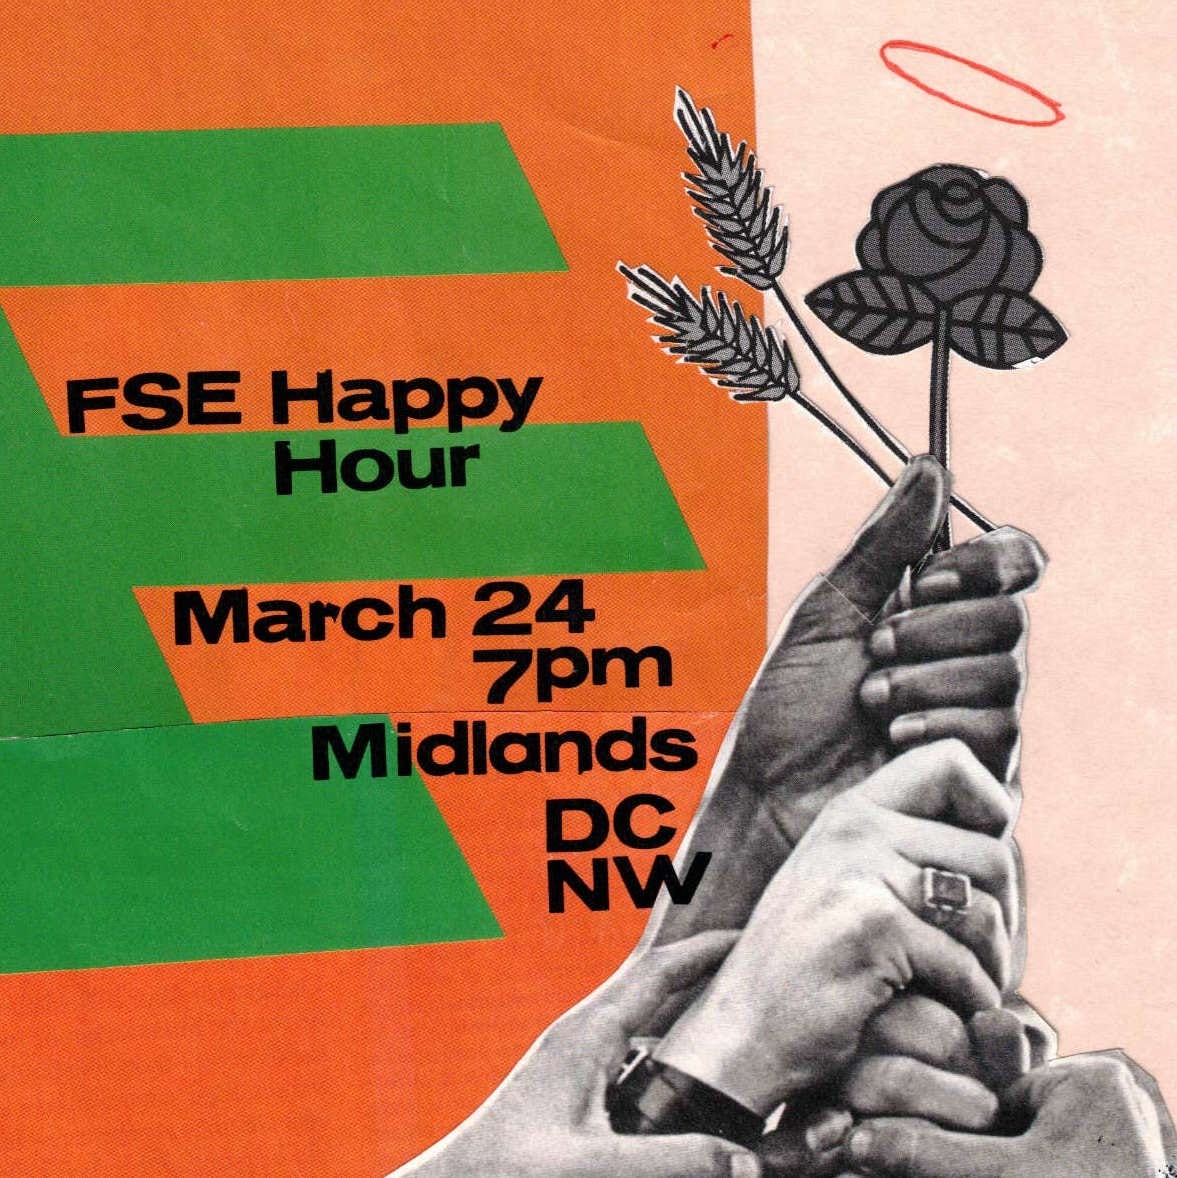 Collage of hands holding up wheat and roses. Text: FSE Happy Hour, March 24, 7pm, Midlands, DC NW